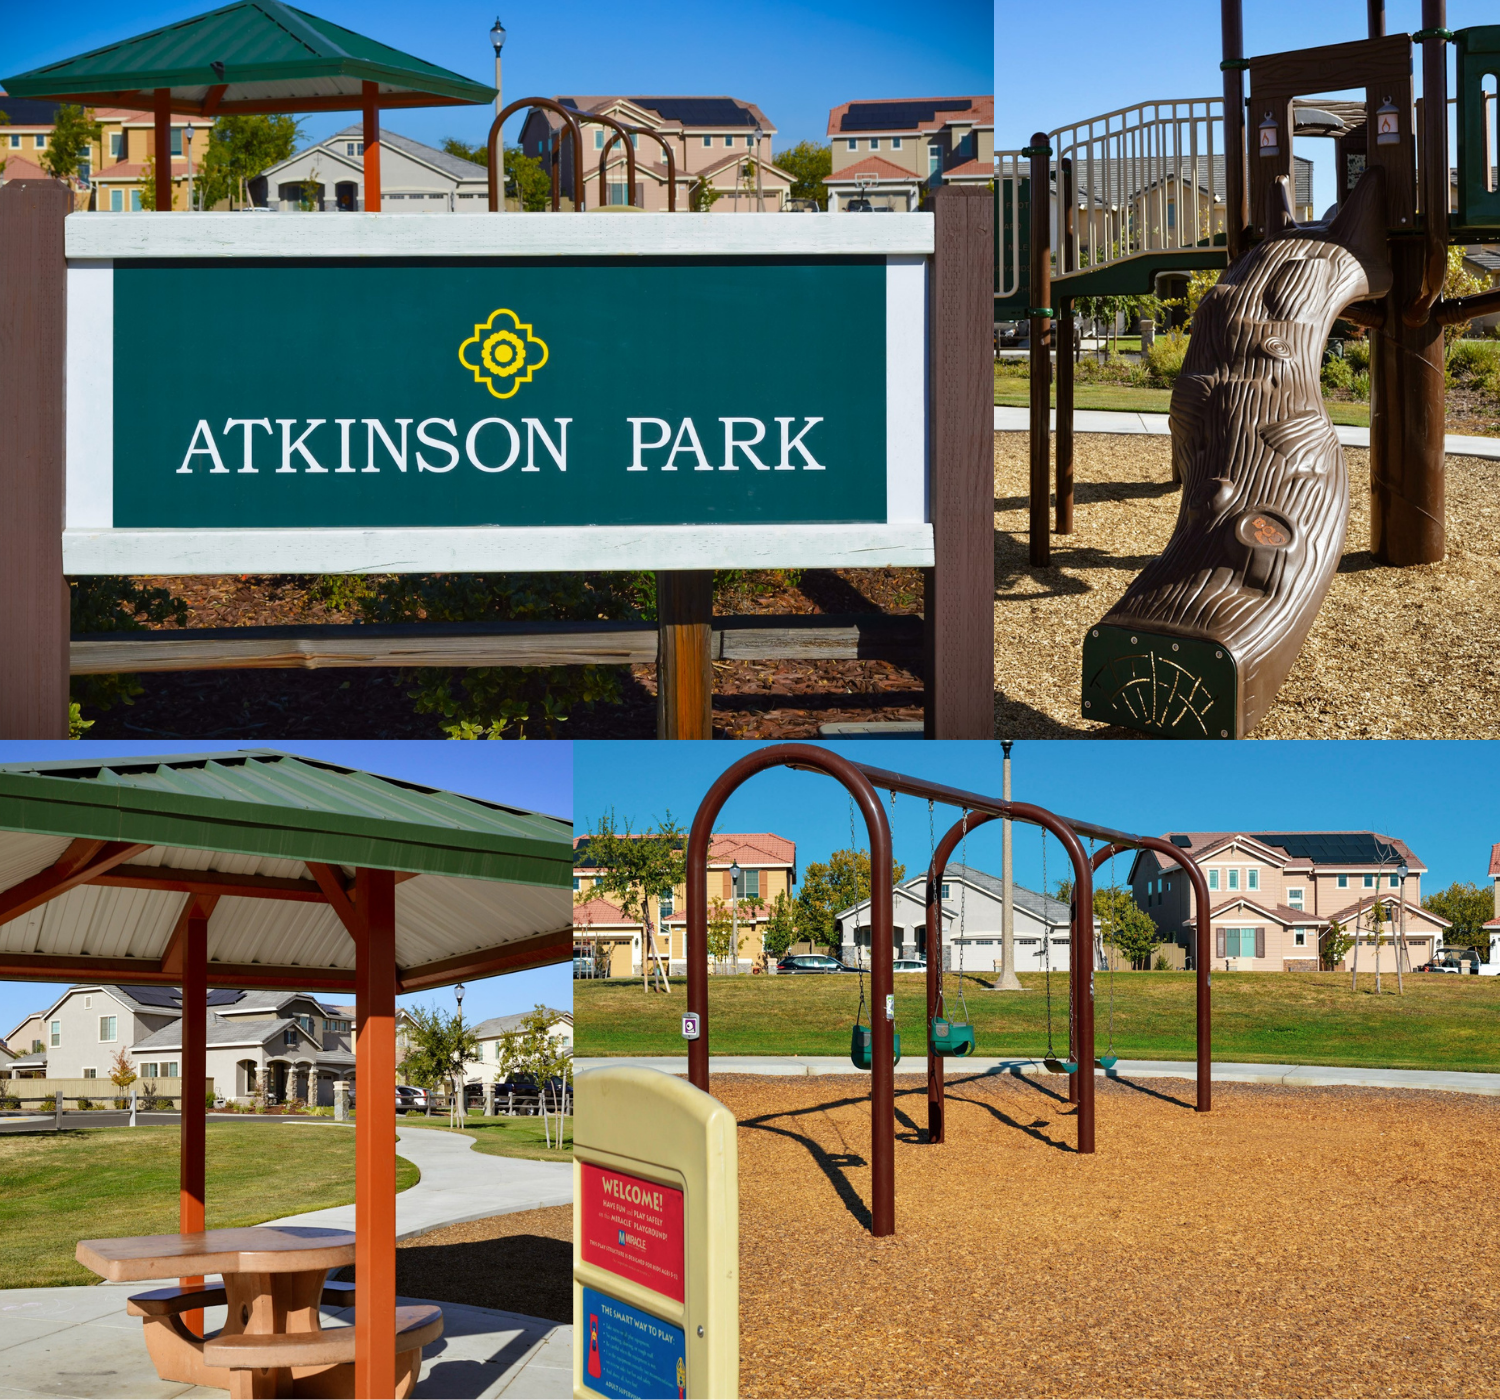 Photo collage of park on sunny day